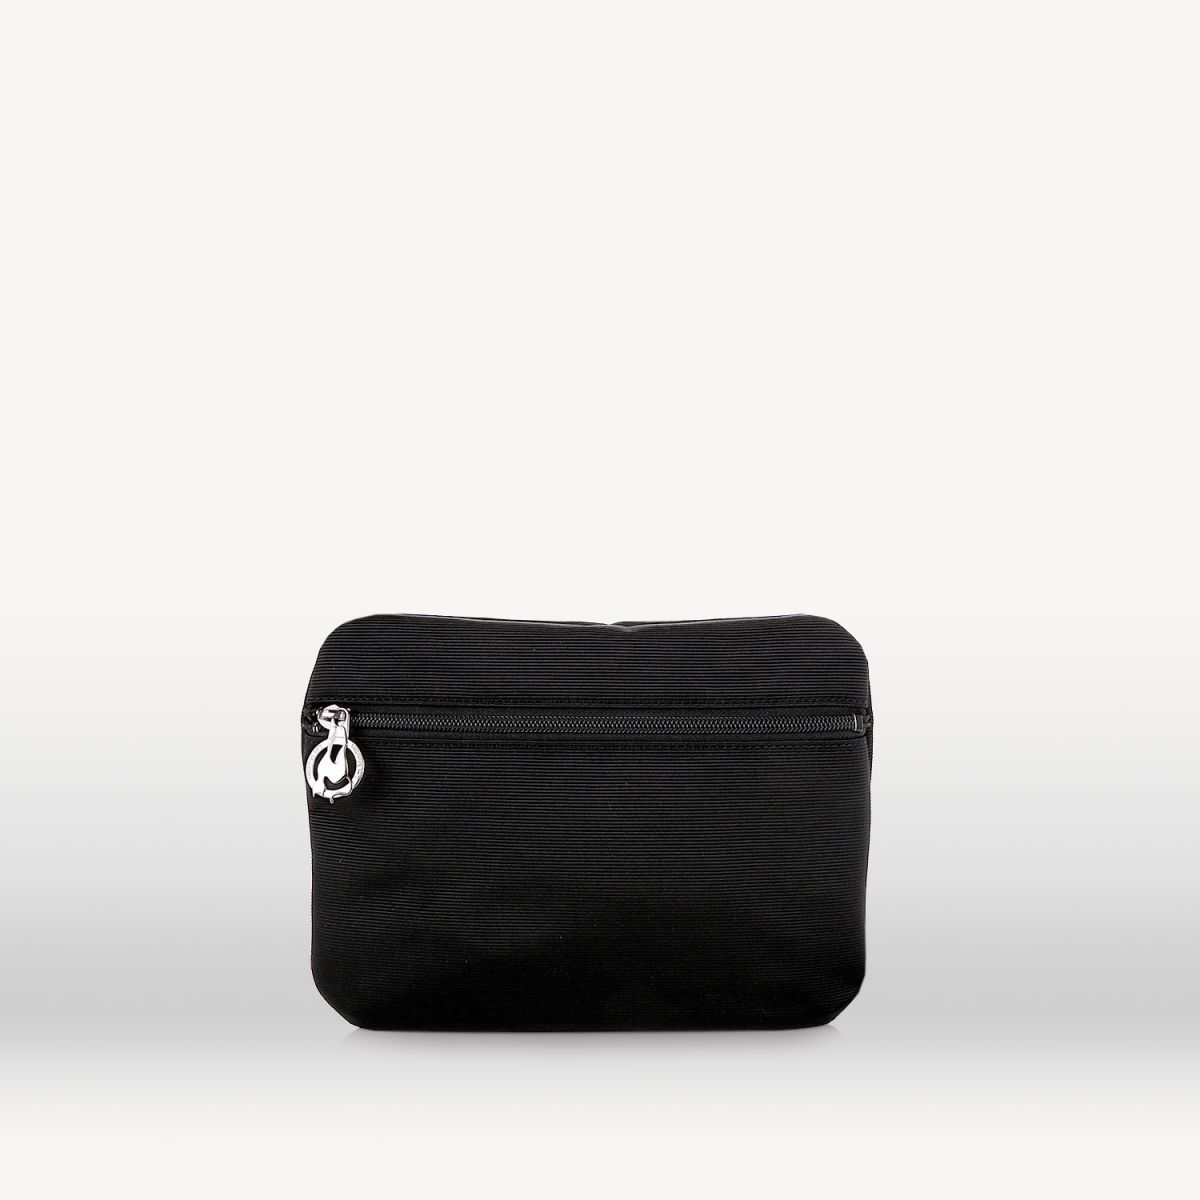 Additional pouch Black flutted canvas